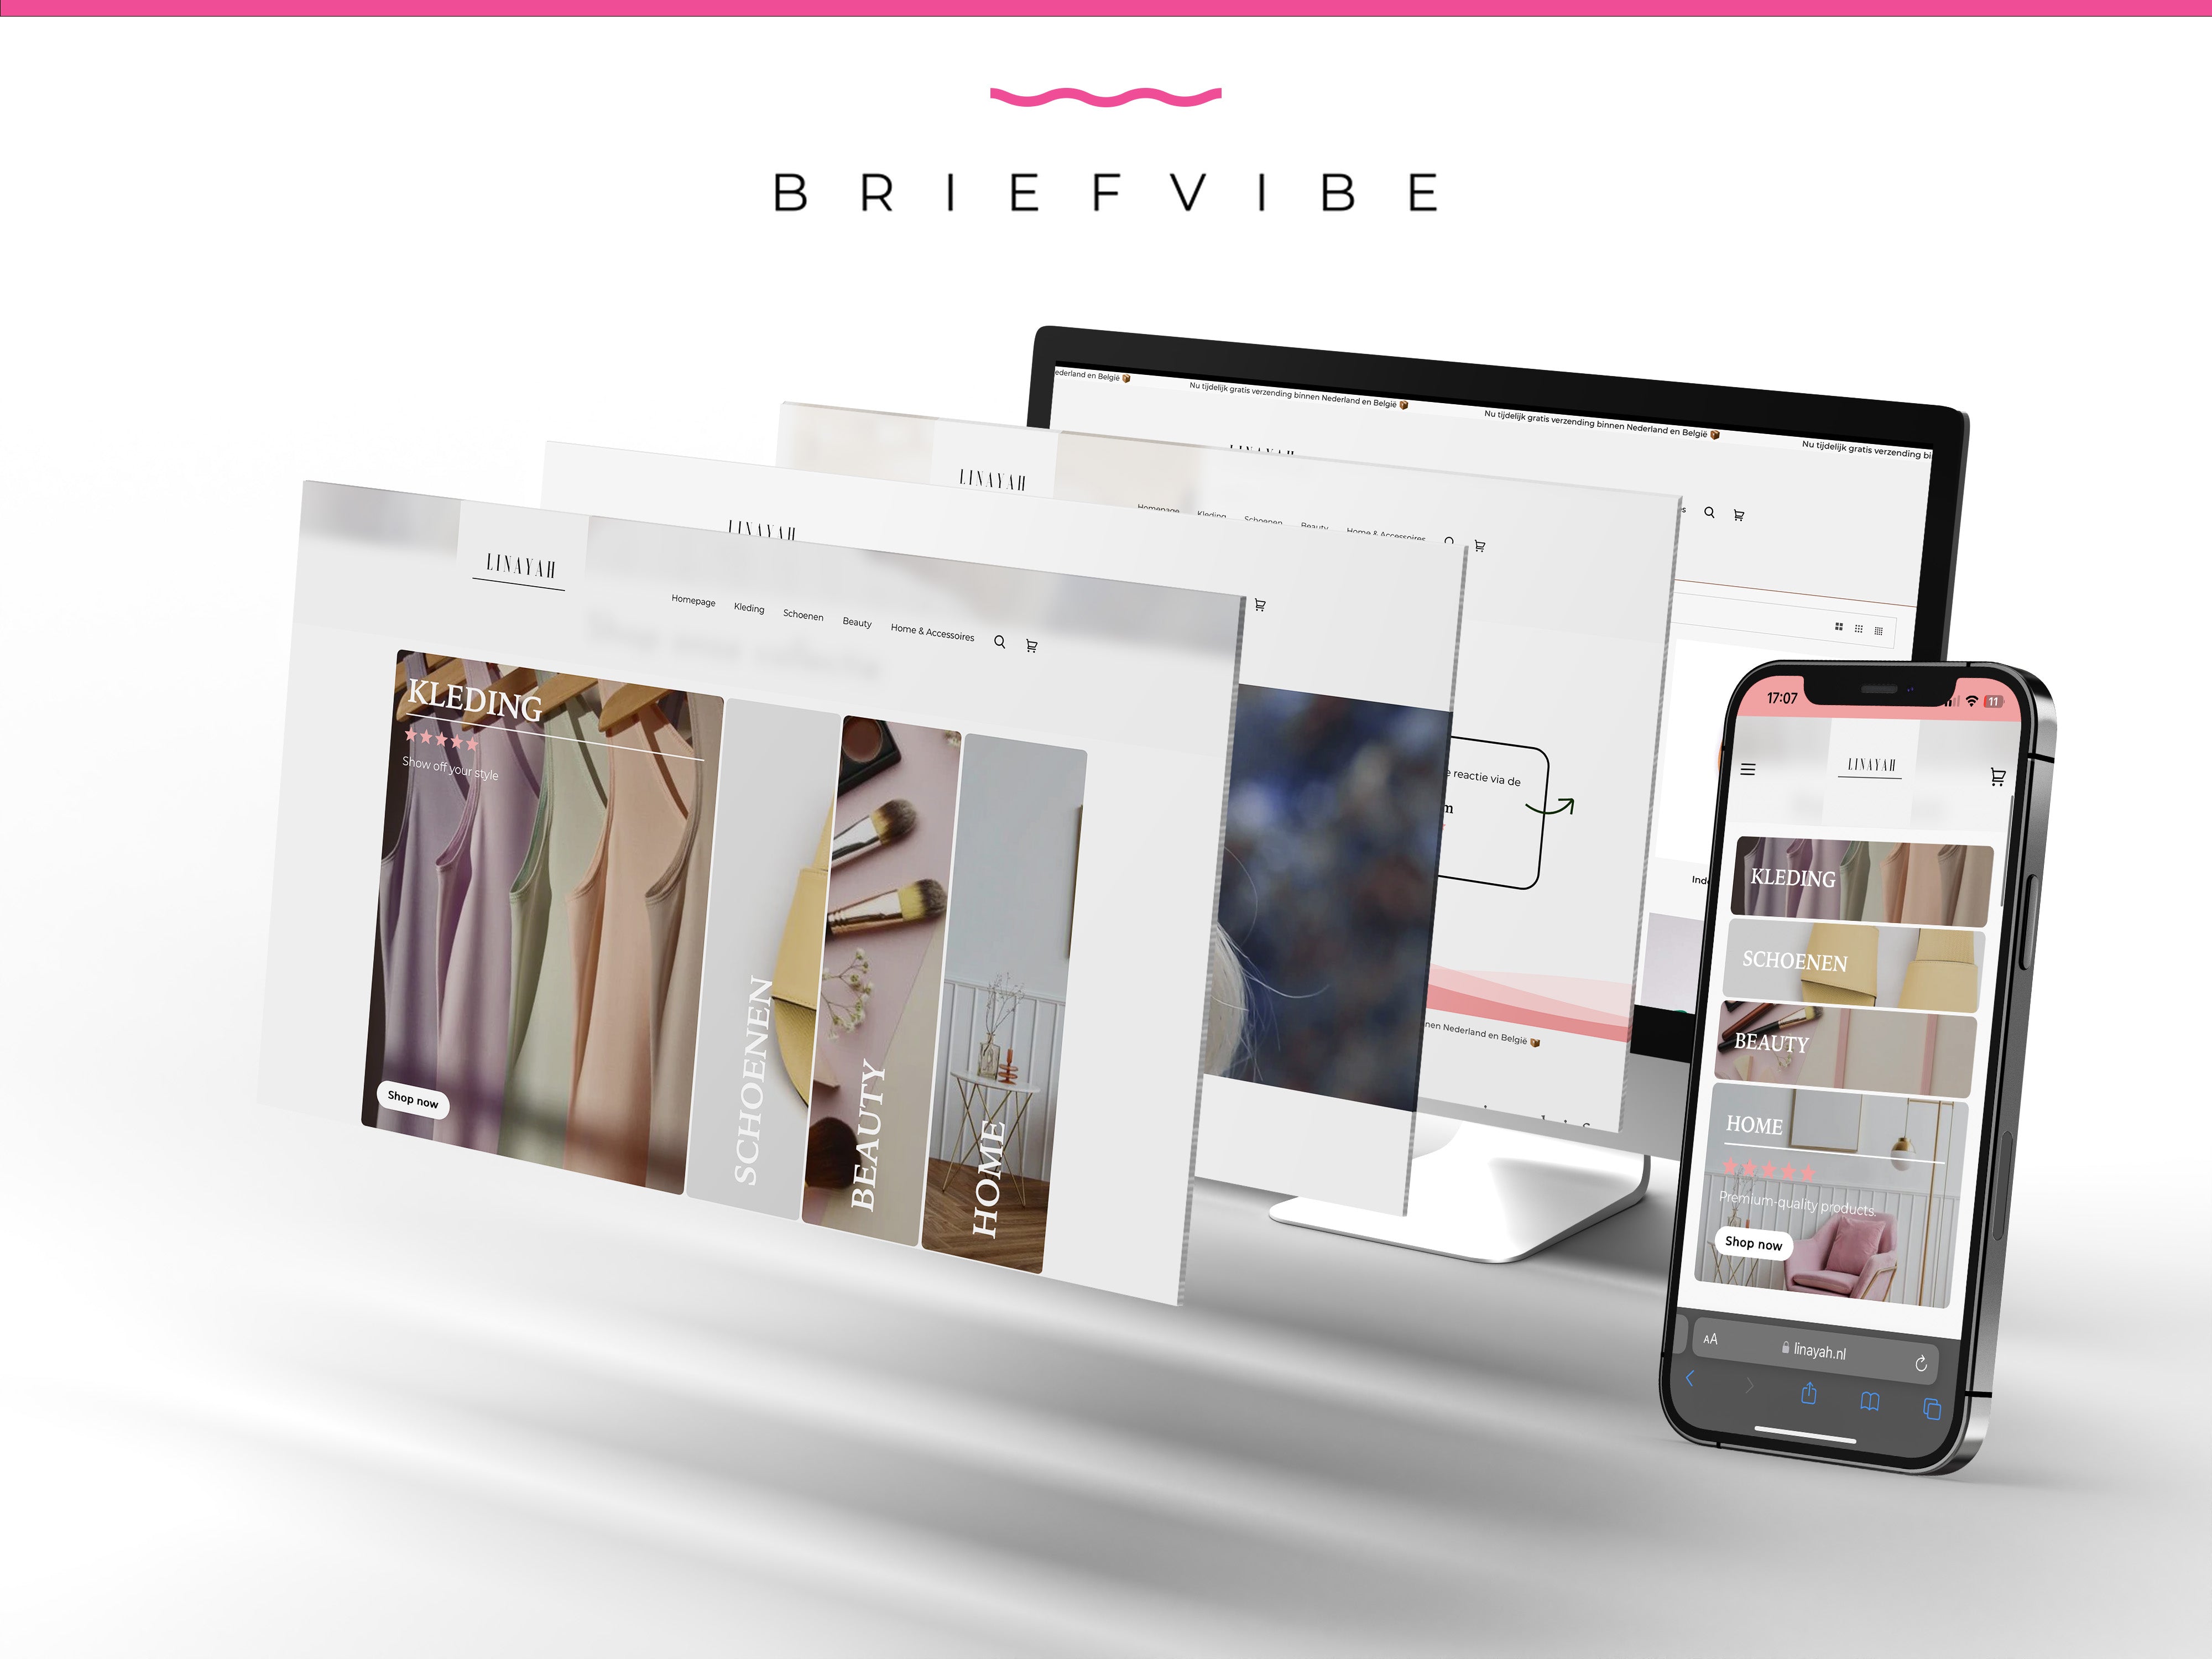 Briefvibe - Webshop design by Briefvibe for woman clothing and beauty